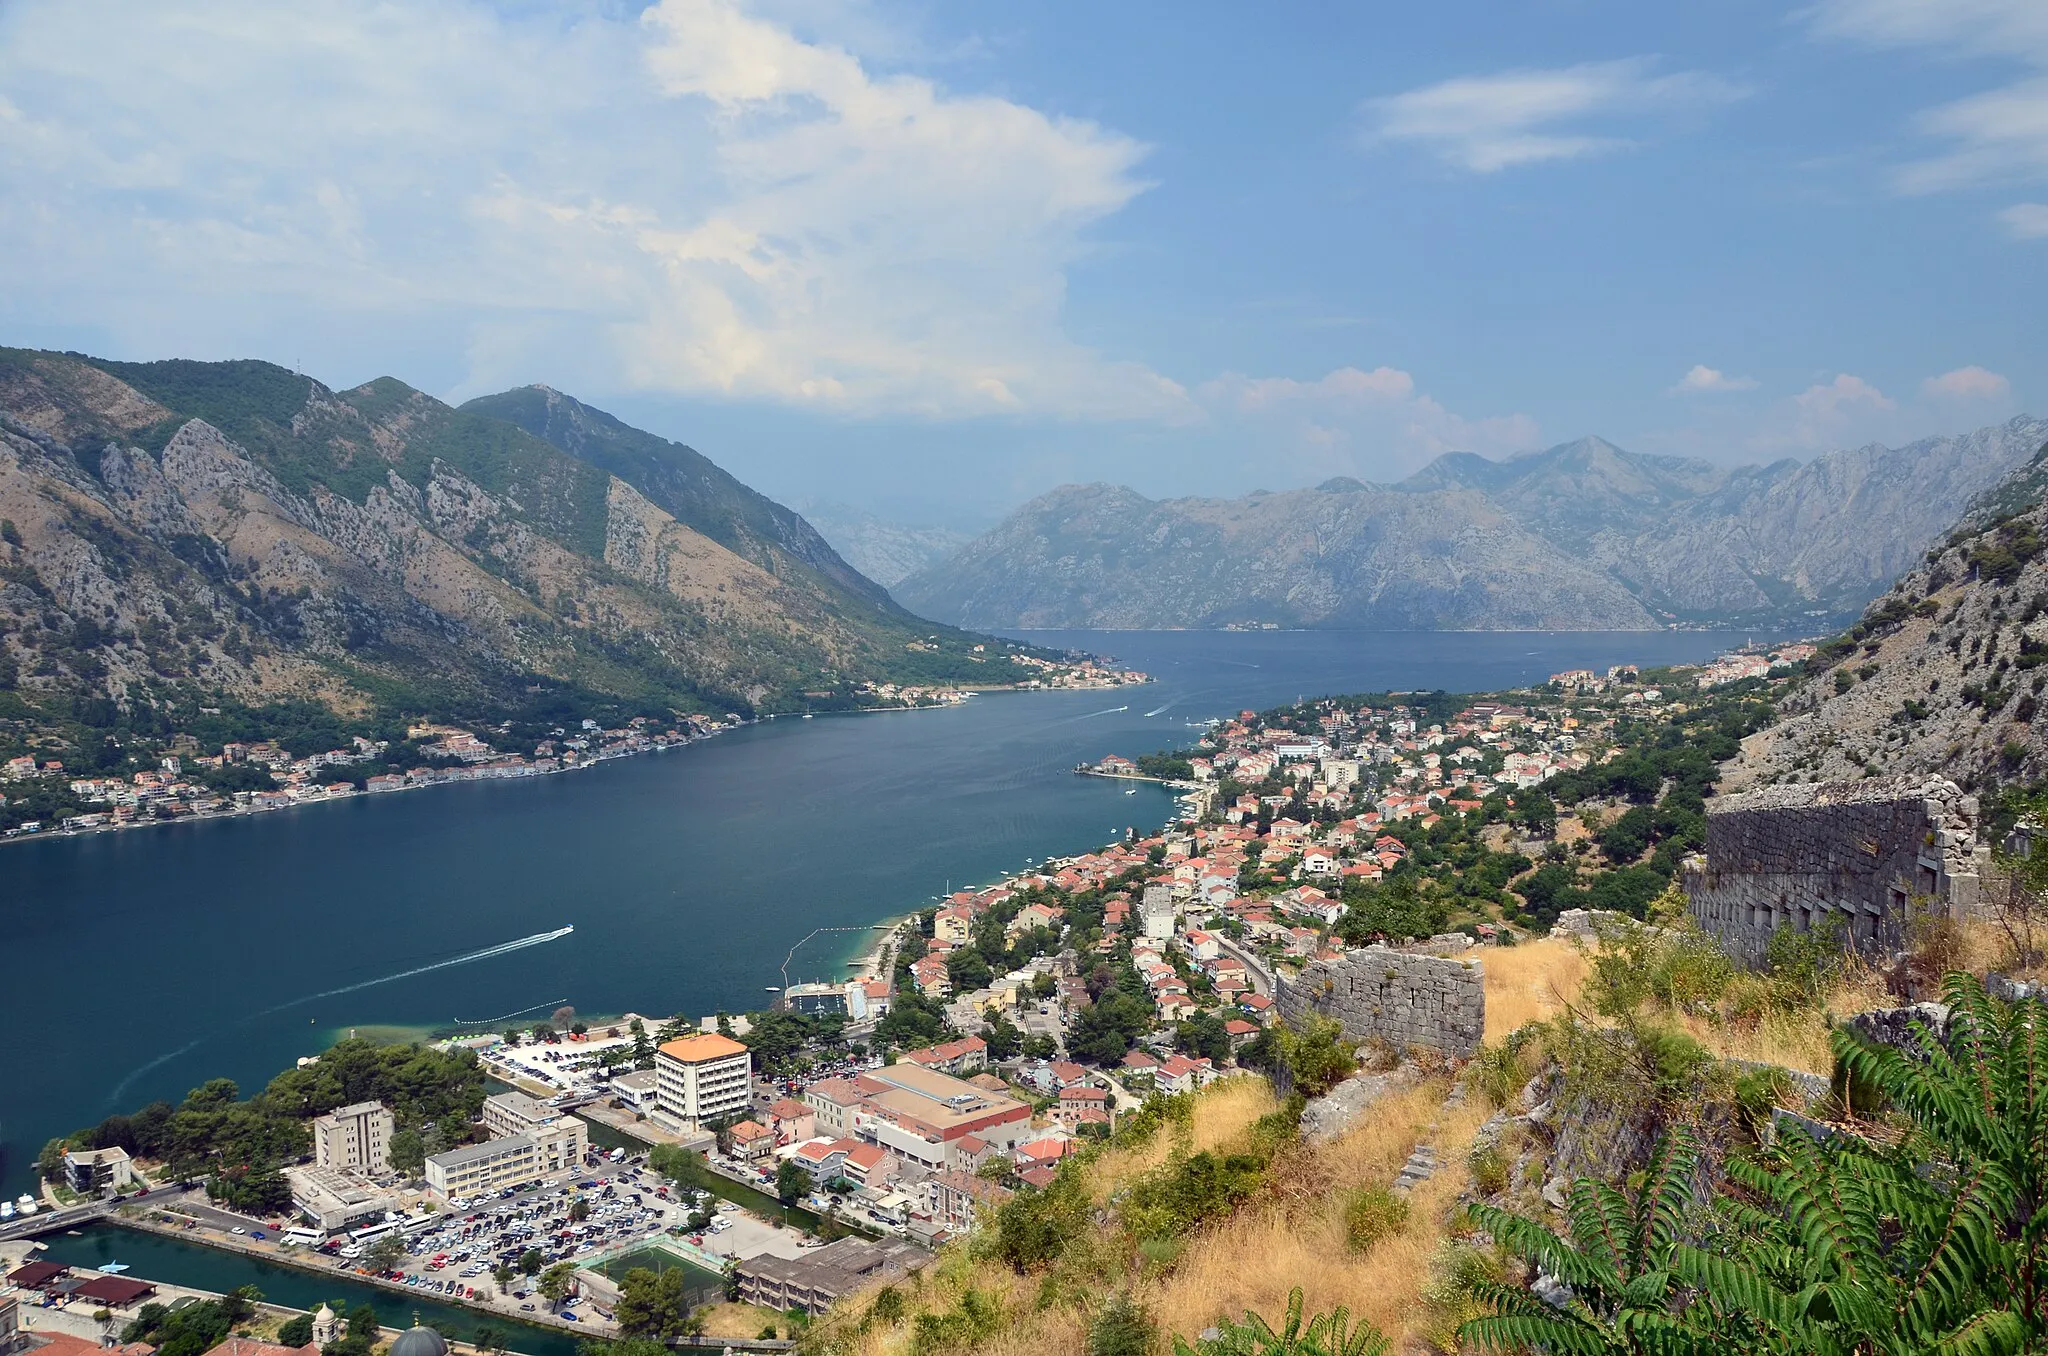 Photo showing: The bay of Kotor (Montenegro) viewed from the path climbing to St-John's castle.